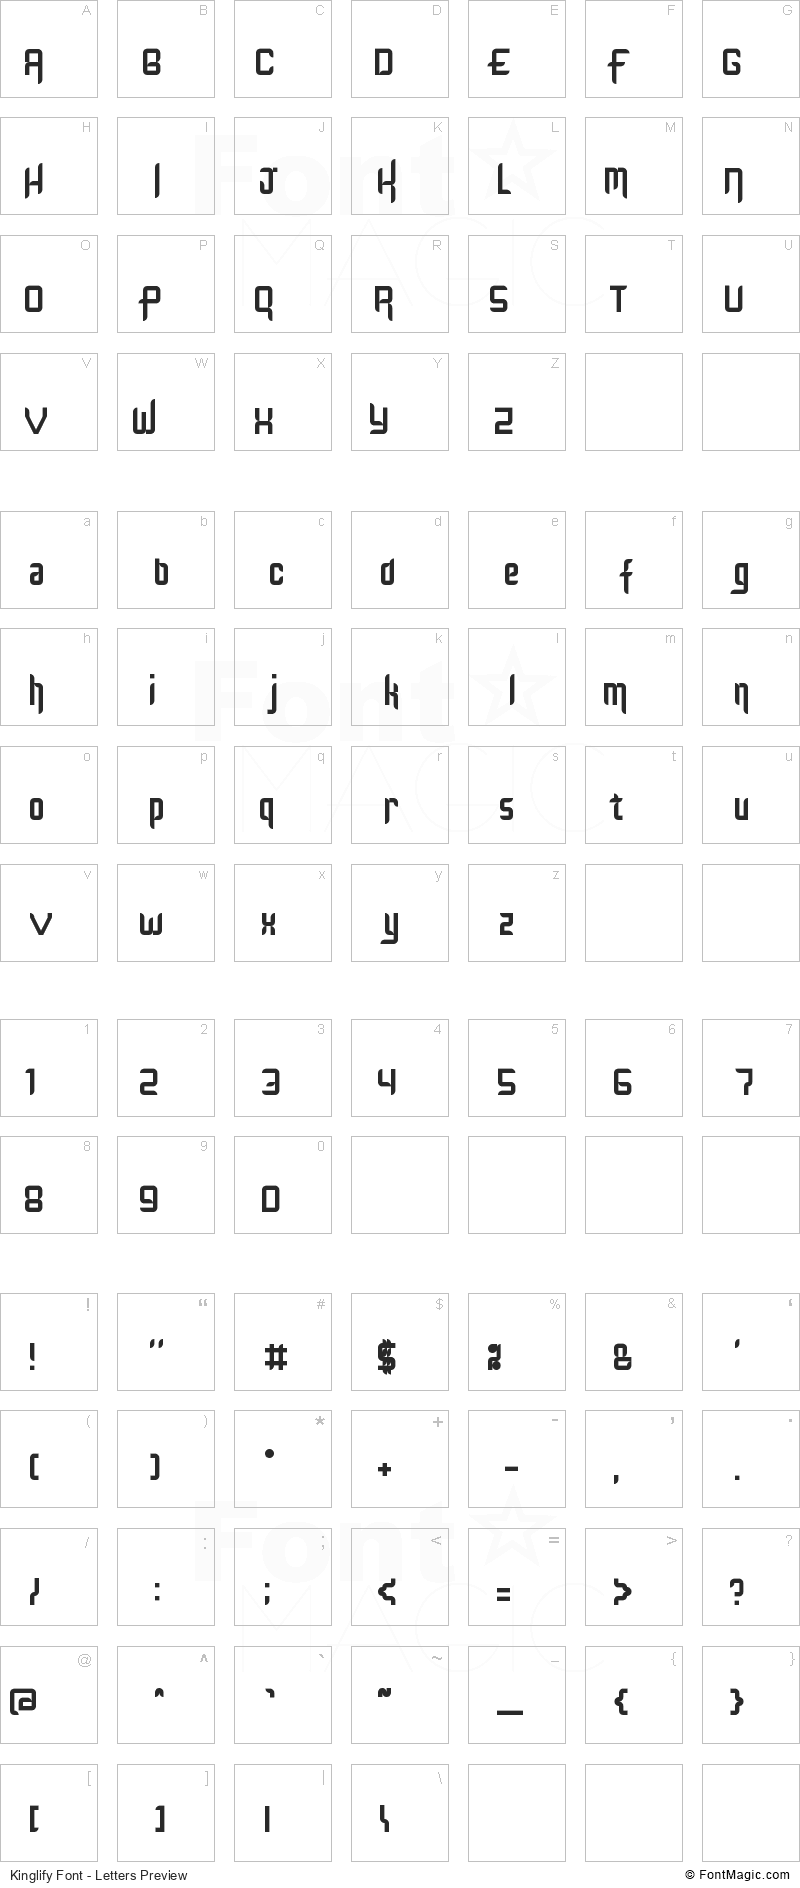 Kinglify Font - All Latters Preview Chart